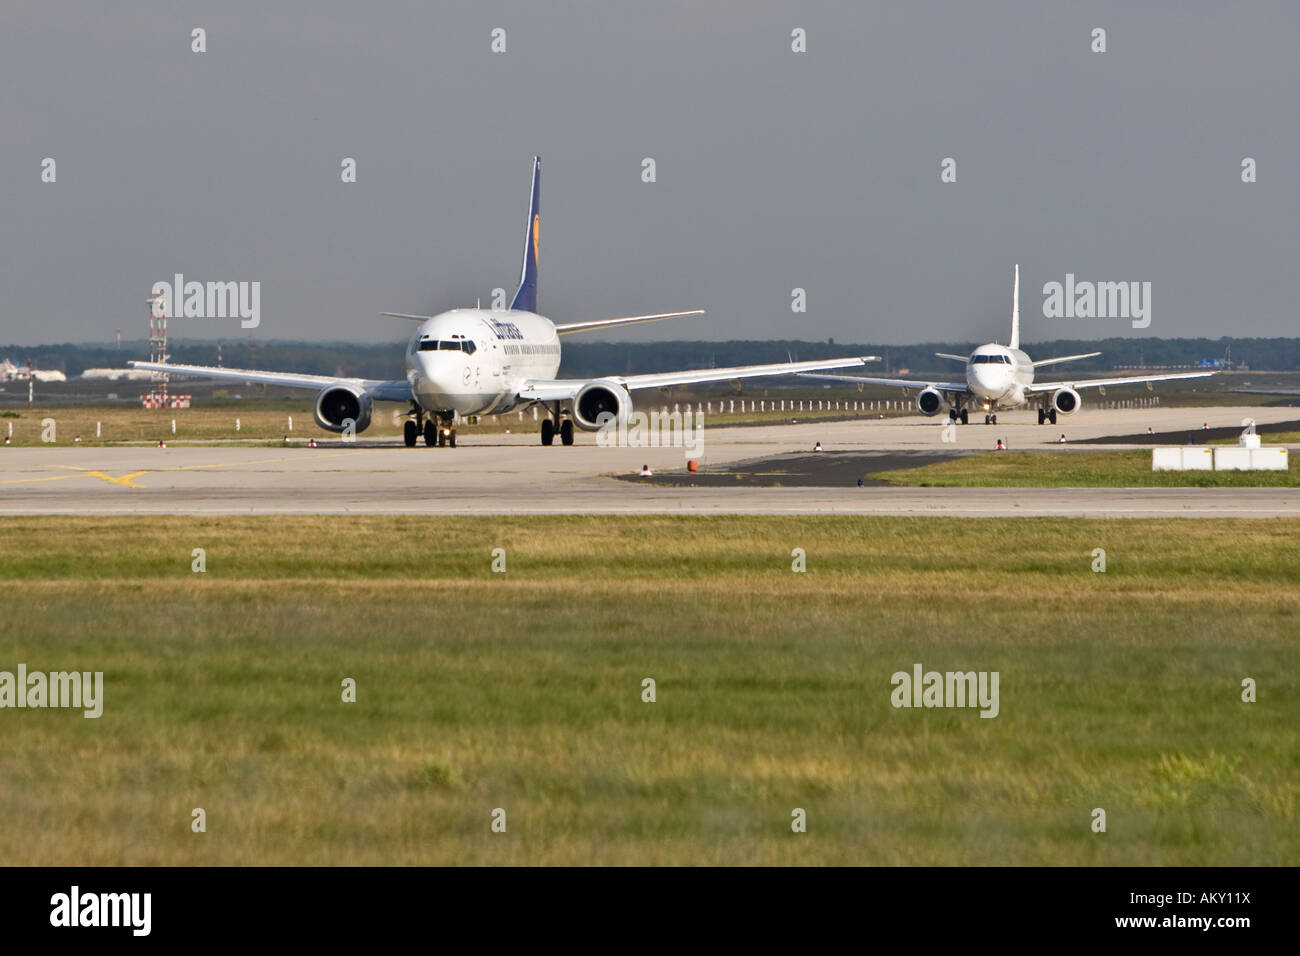 2 airplanes waiting for take off Startbahn 18 West, Airport Frankfurt, Hesse, Germany Stock Photo